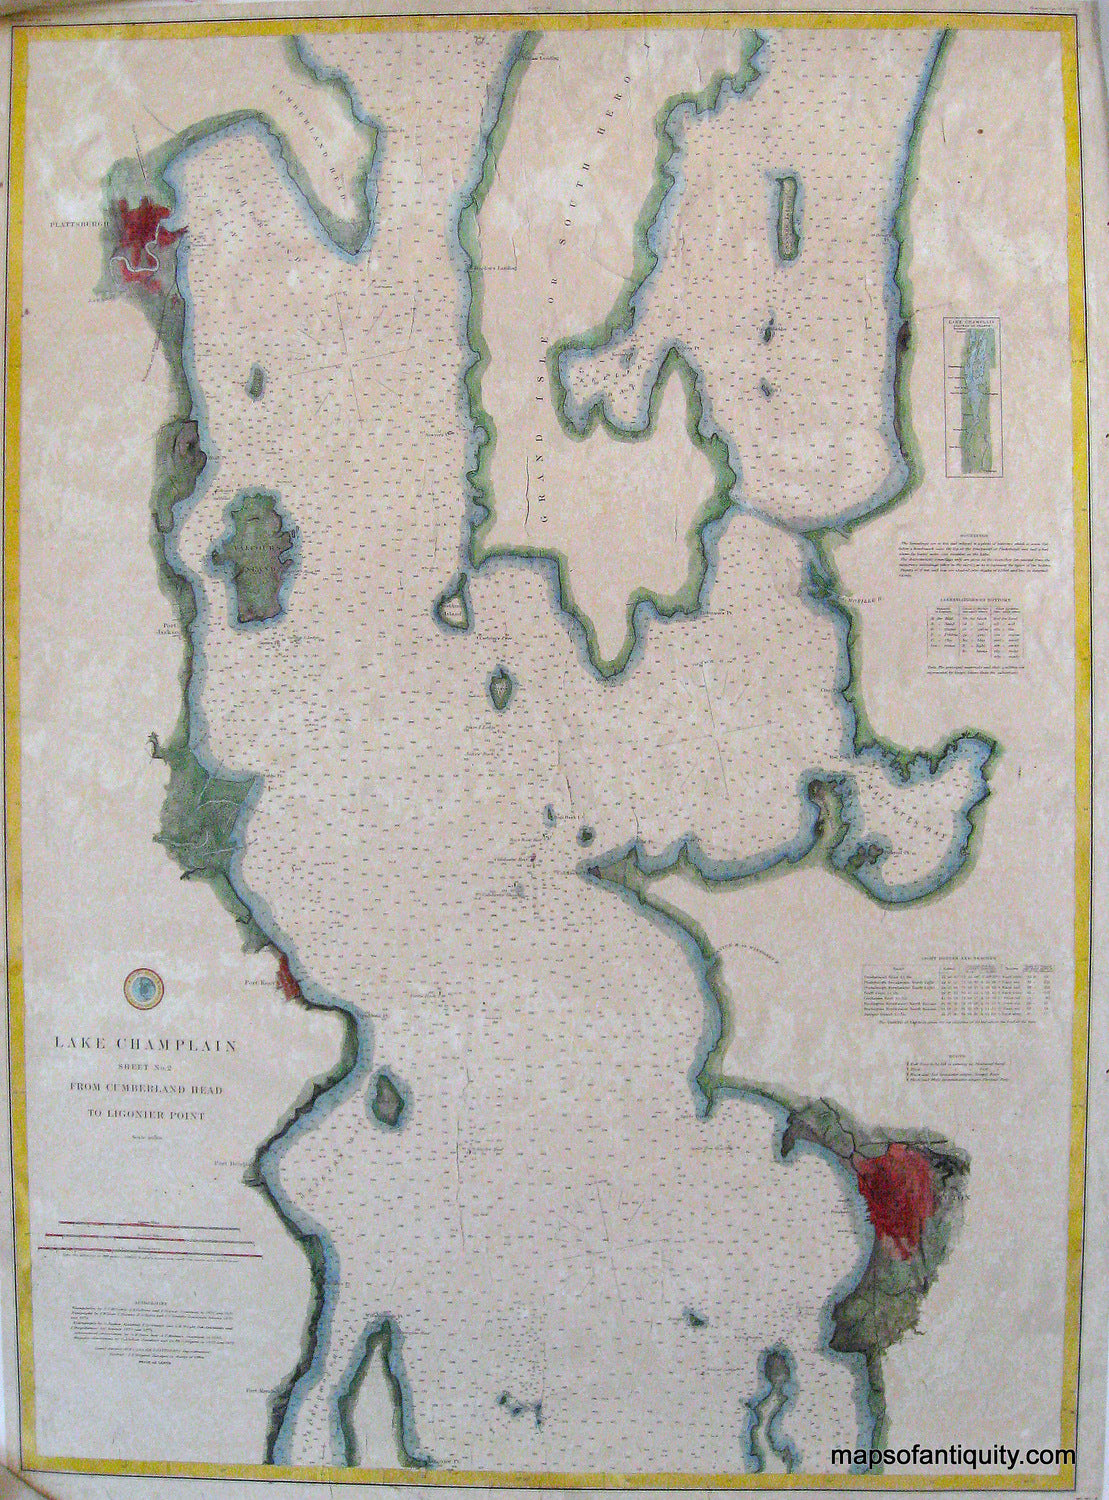 Reproduction-Lake-Champlain-Sheet-No-2-from-Cumberland-Head-to-Ligonier-Point---Reproduction---Reproduction-Northeast--Reproduction-Maps-Of-Antiquity